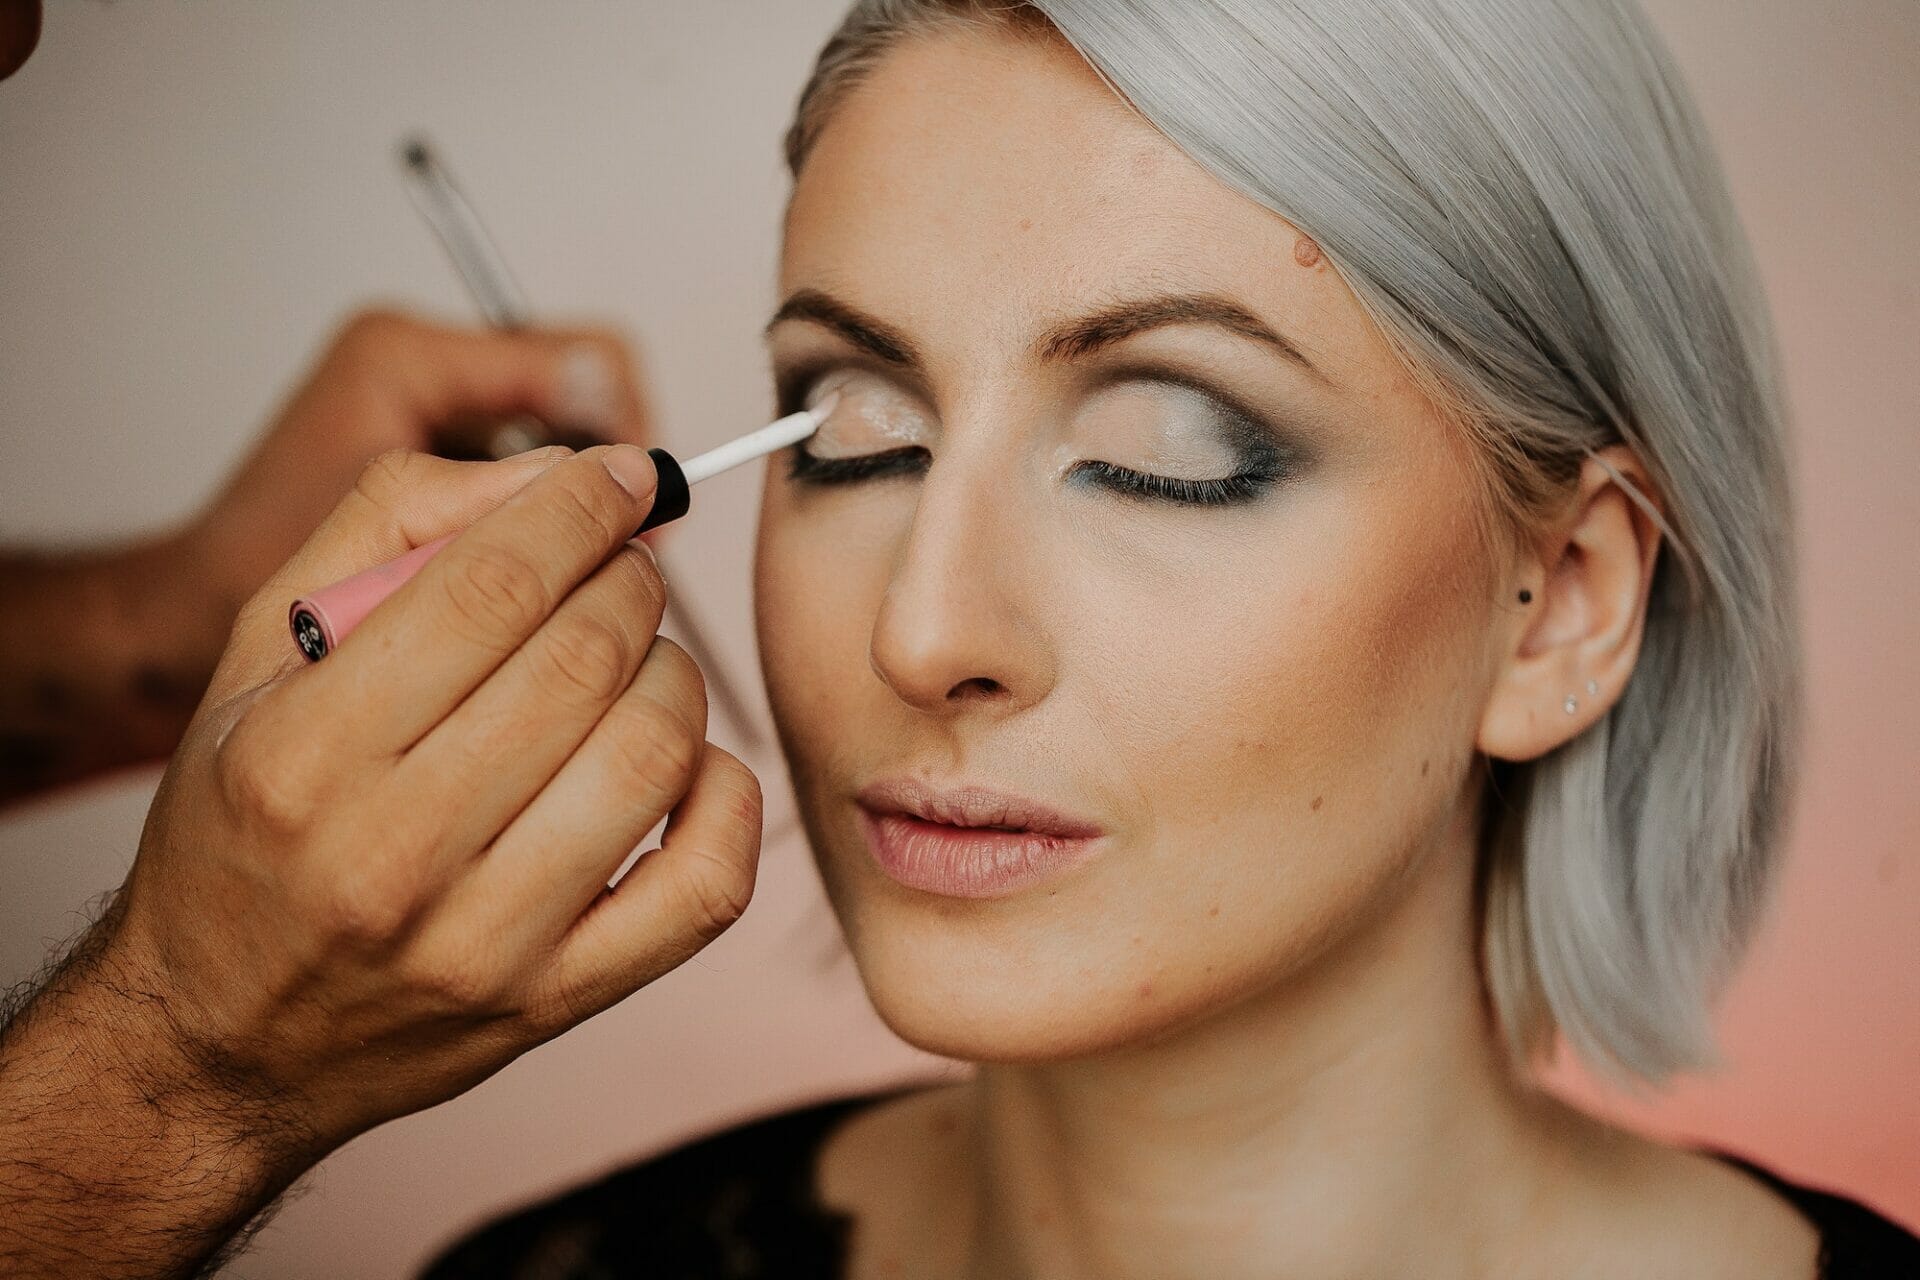 Makeup applications on the eyes of a woman with gray hair